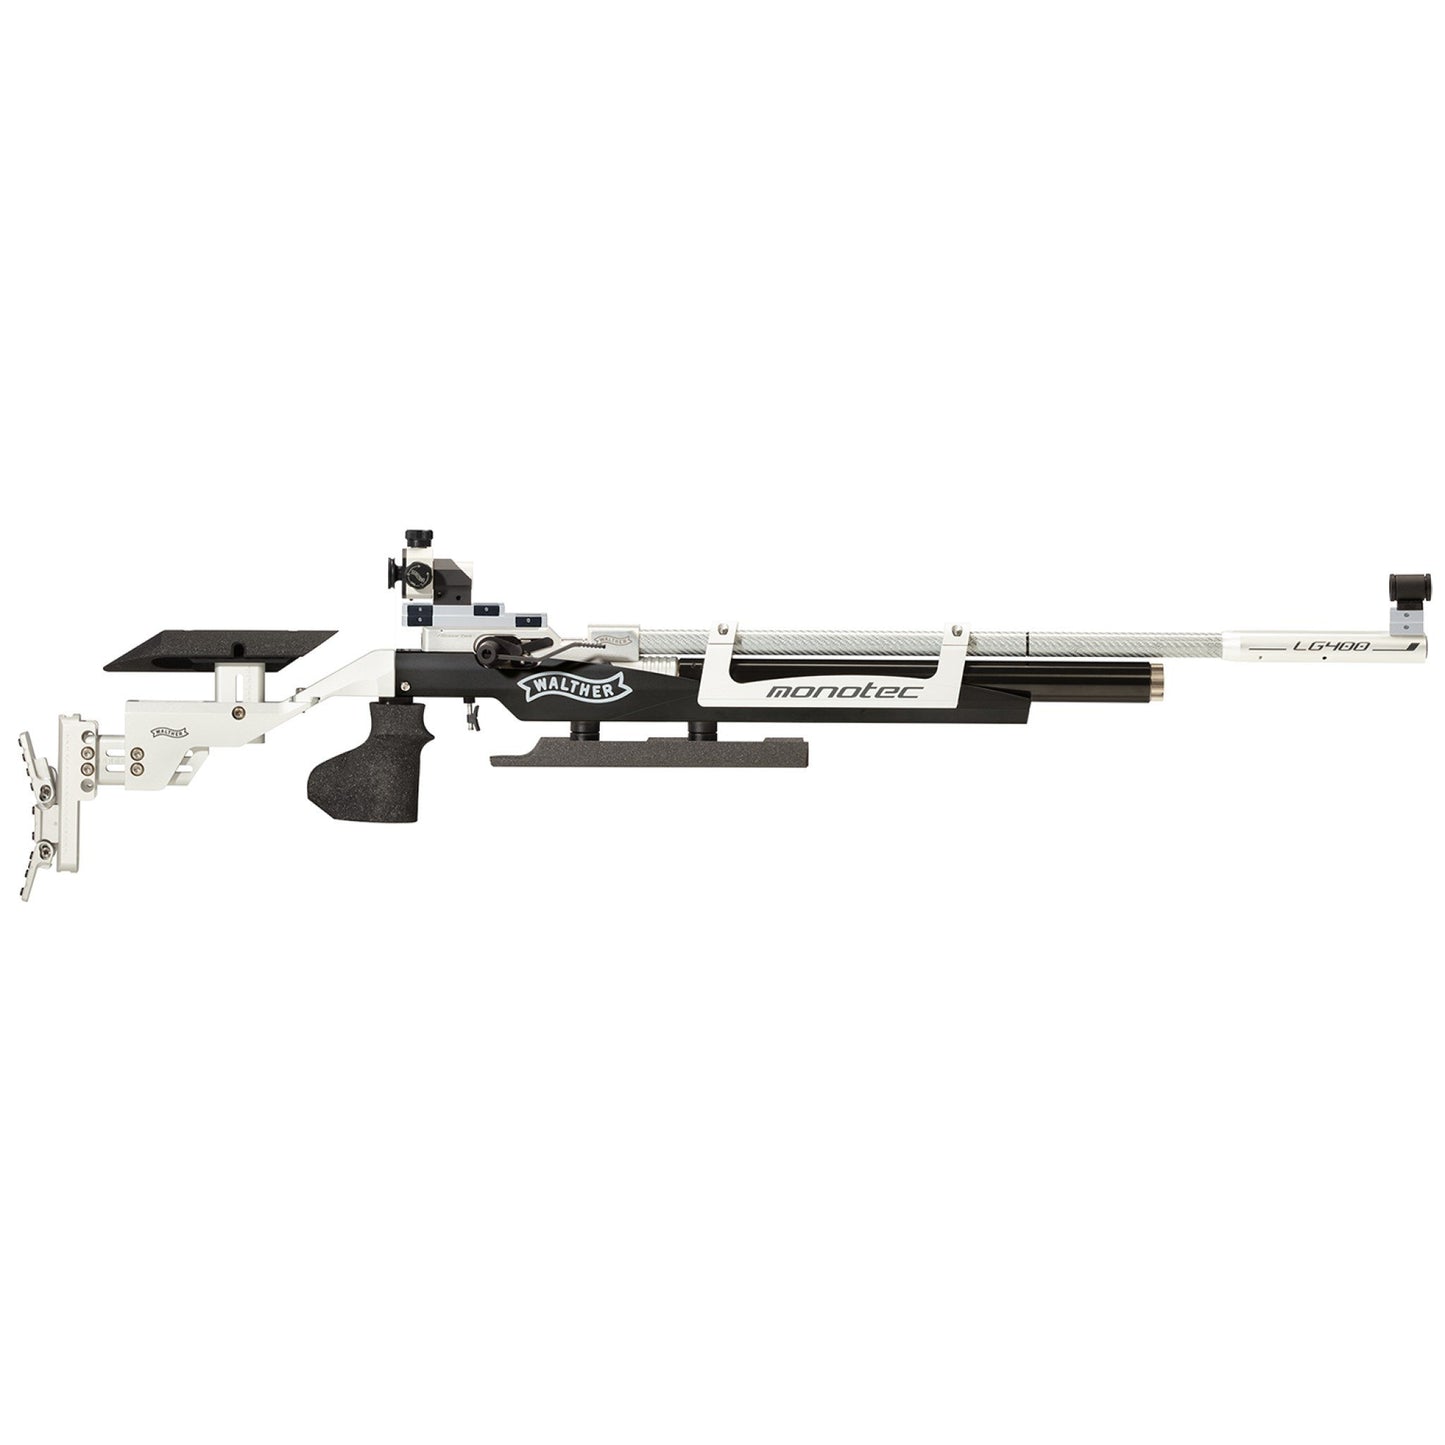 Walther LG400-M MONOTEC COMPETITION Air Rifle